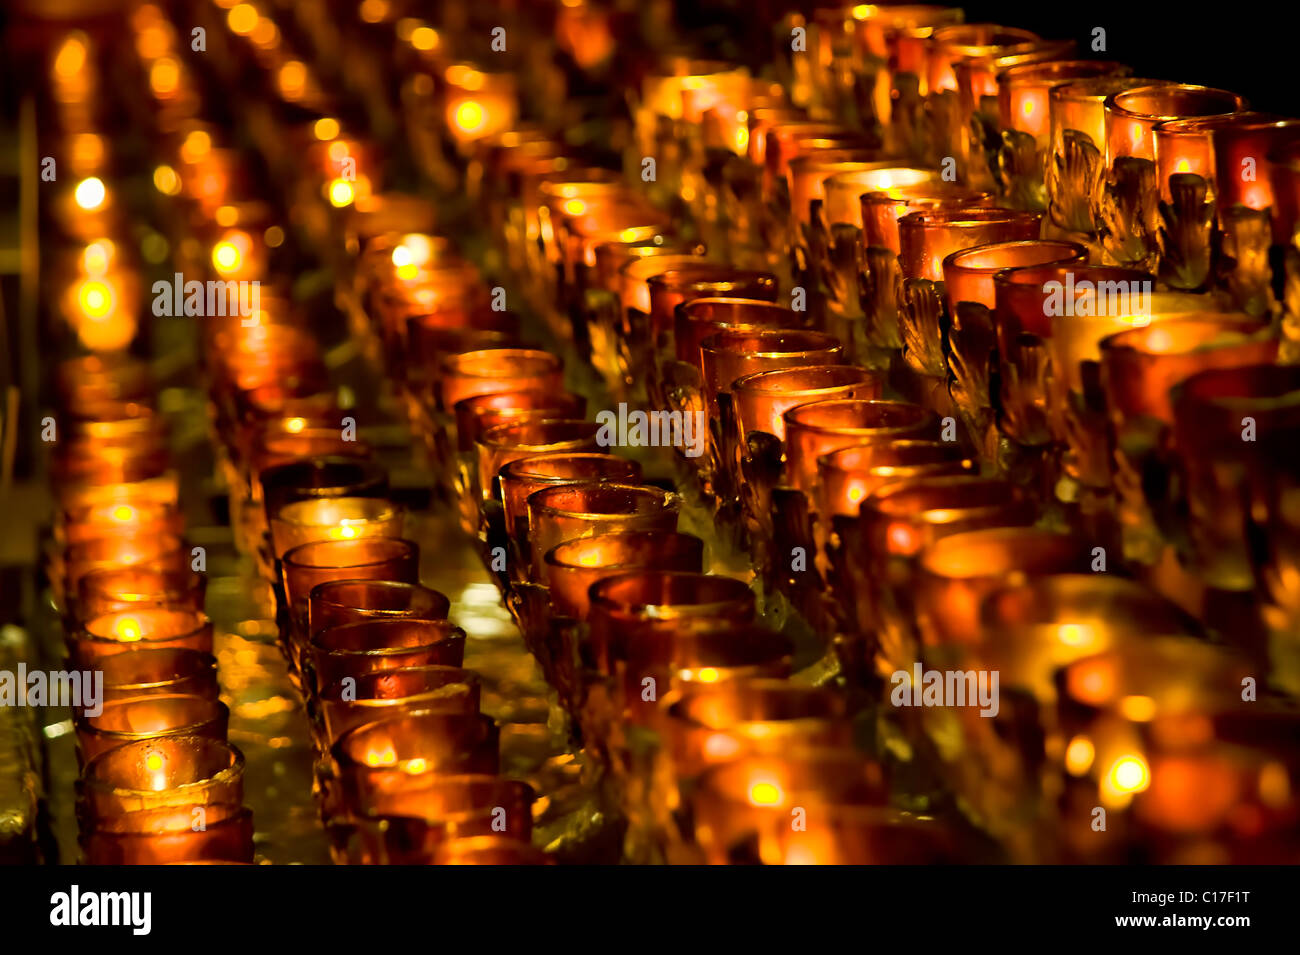 Votice candles in catholic church, St Patrick's Cathedral, NYC Stock Photo